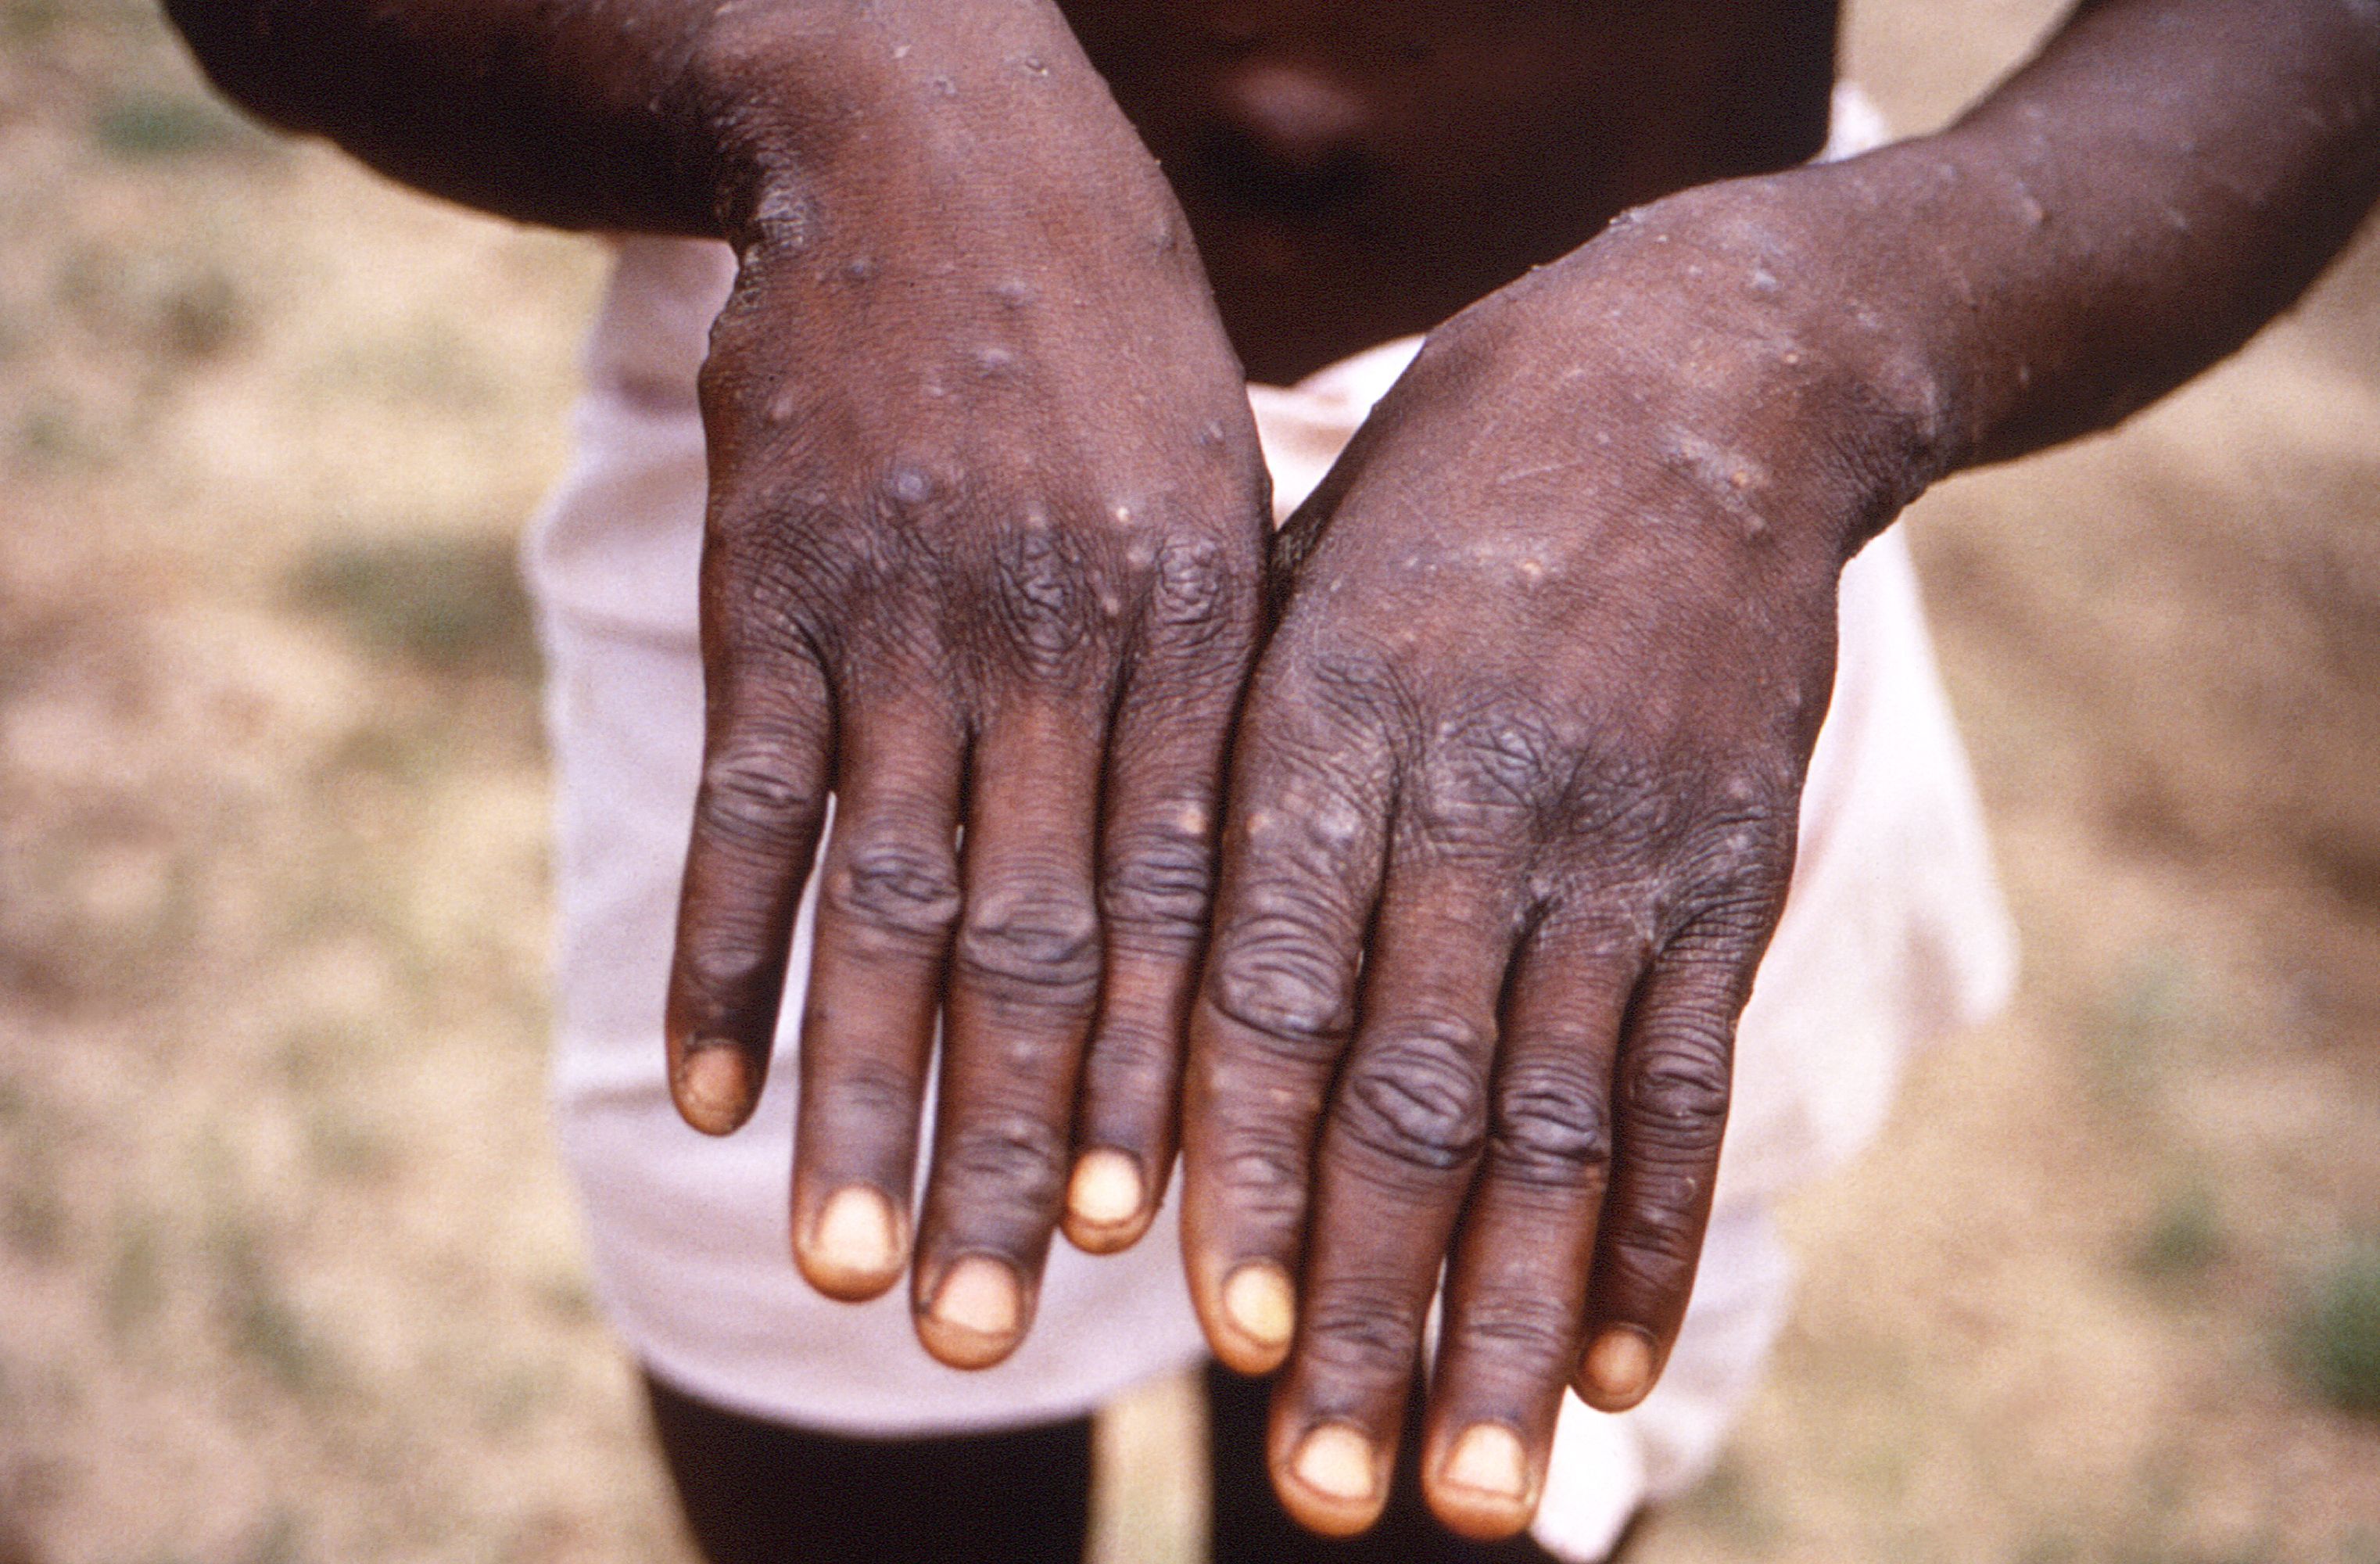 Signs of disease on the hand of the patient.